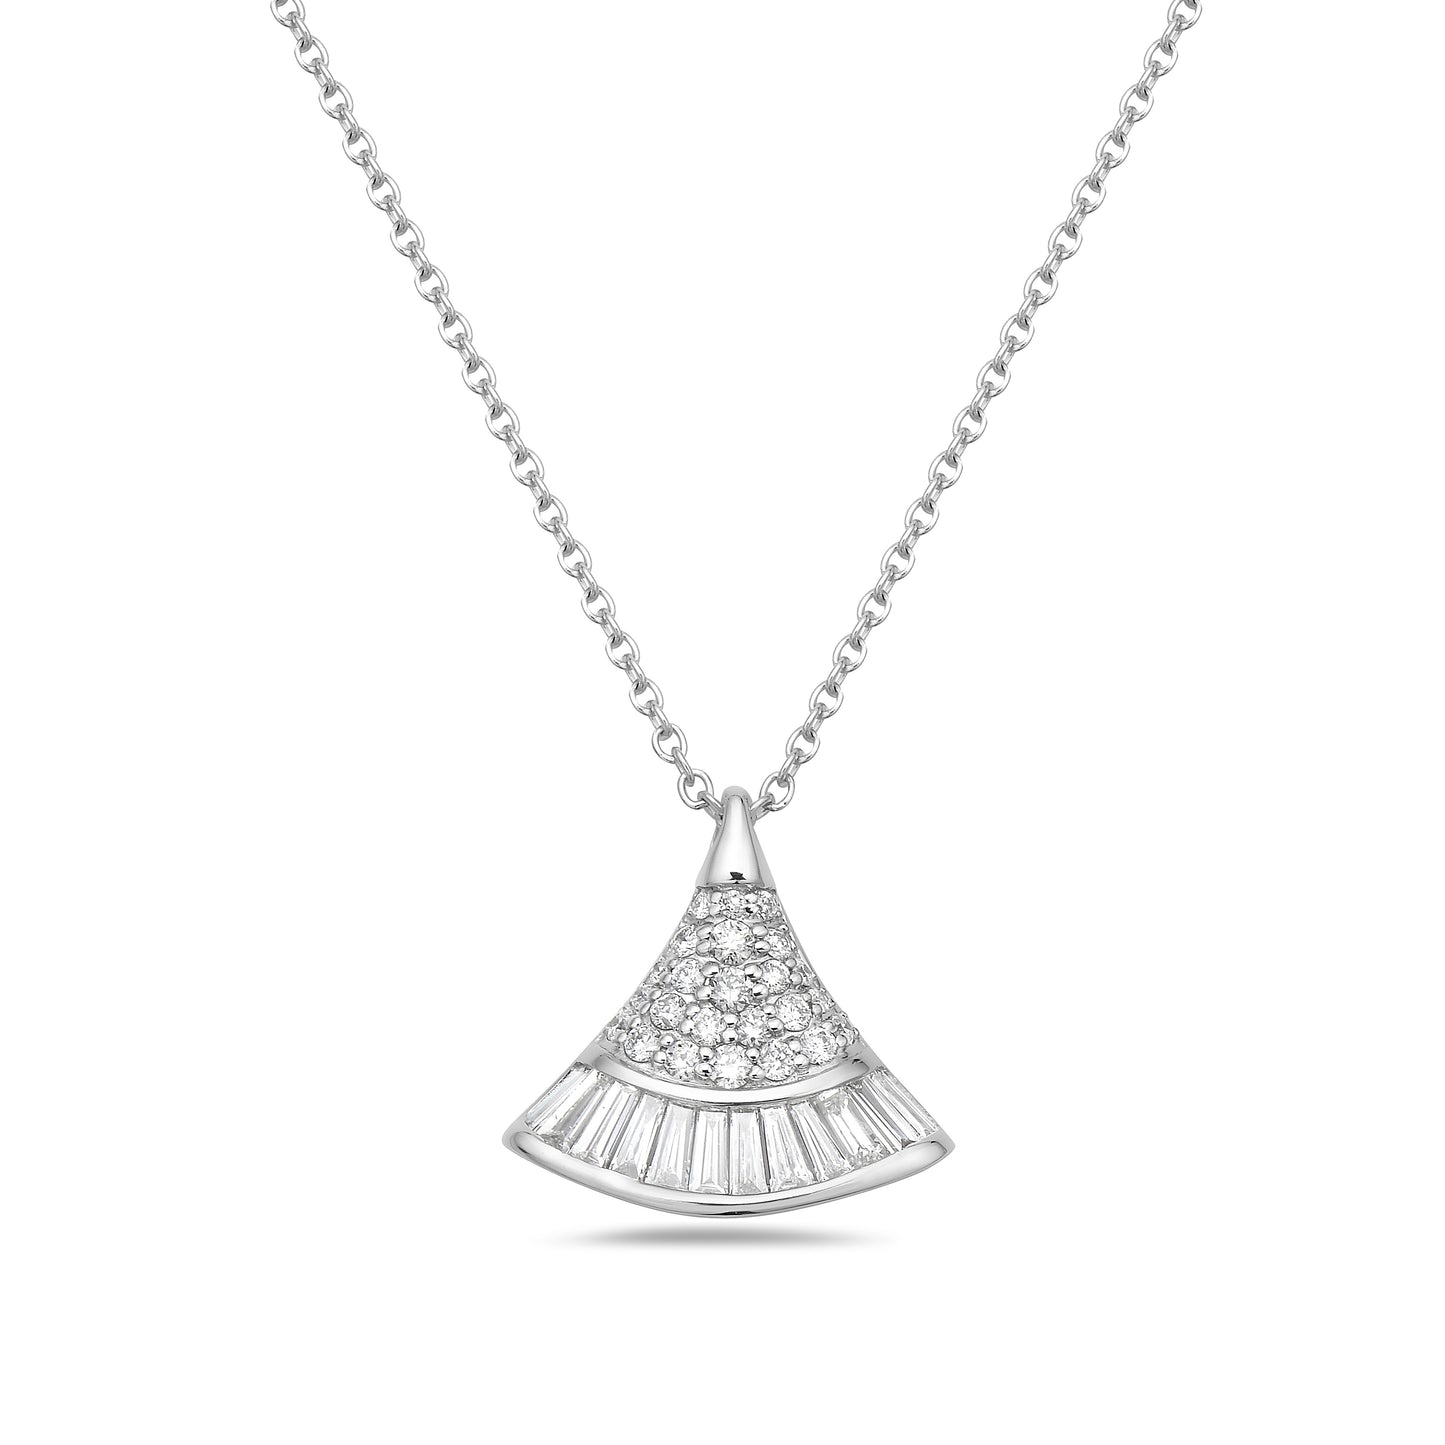 14K HAND-HELD FAN SHAPED PENDANT WITH 24 DIAMONDS 0.50CT AND 12 TAPER DIAMONDS 1CT ON 18 INCHES CHAIN